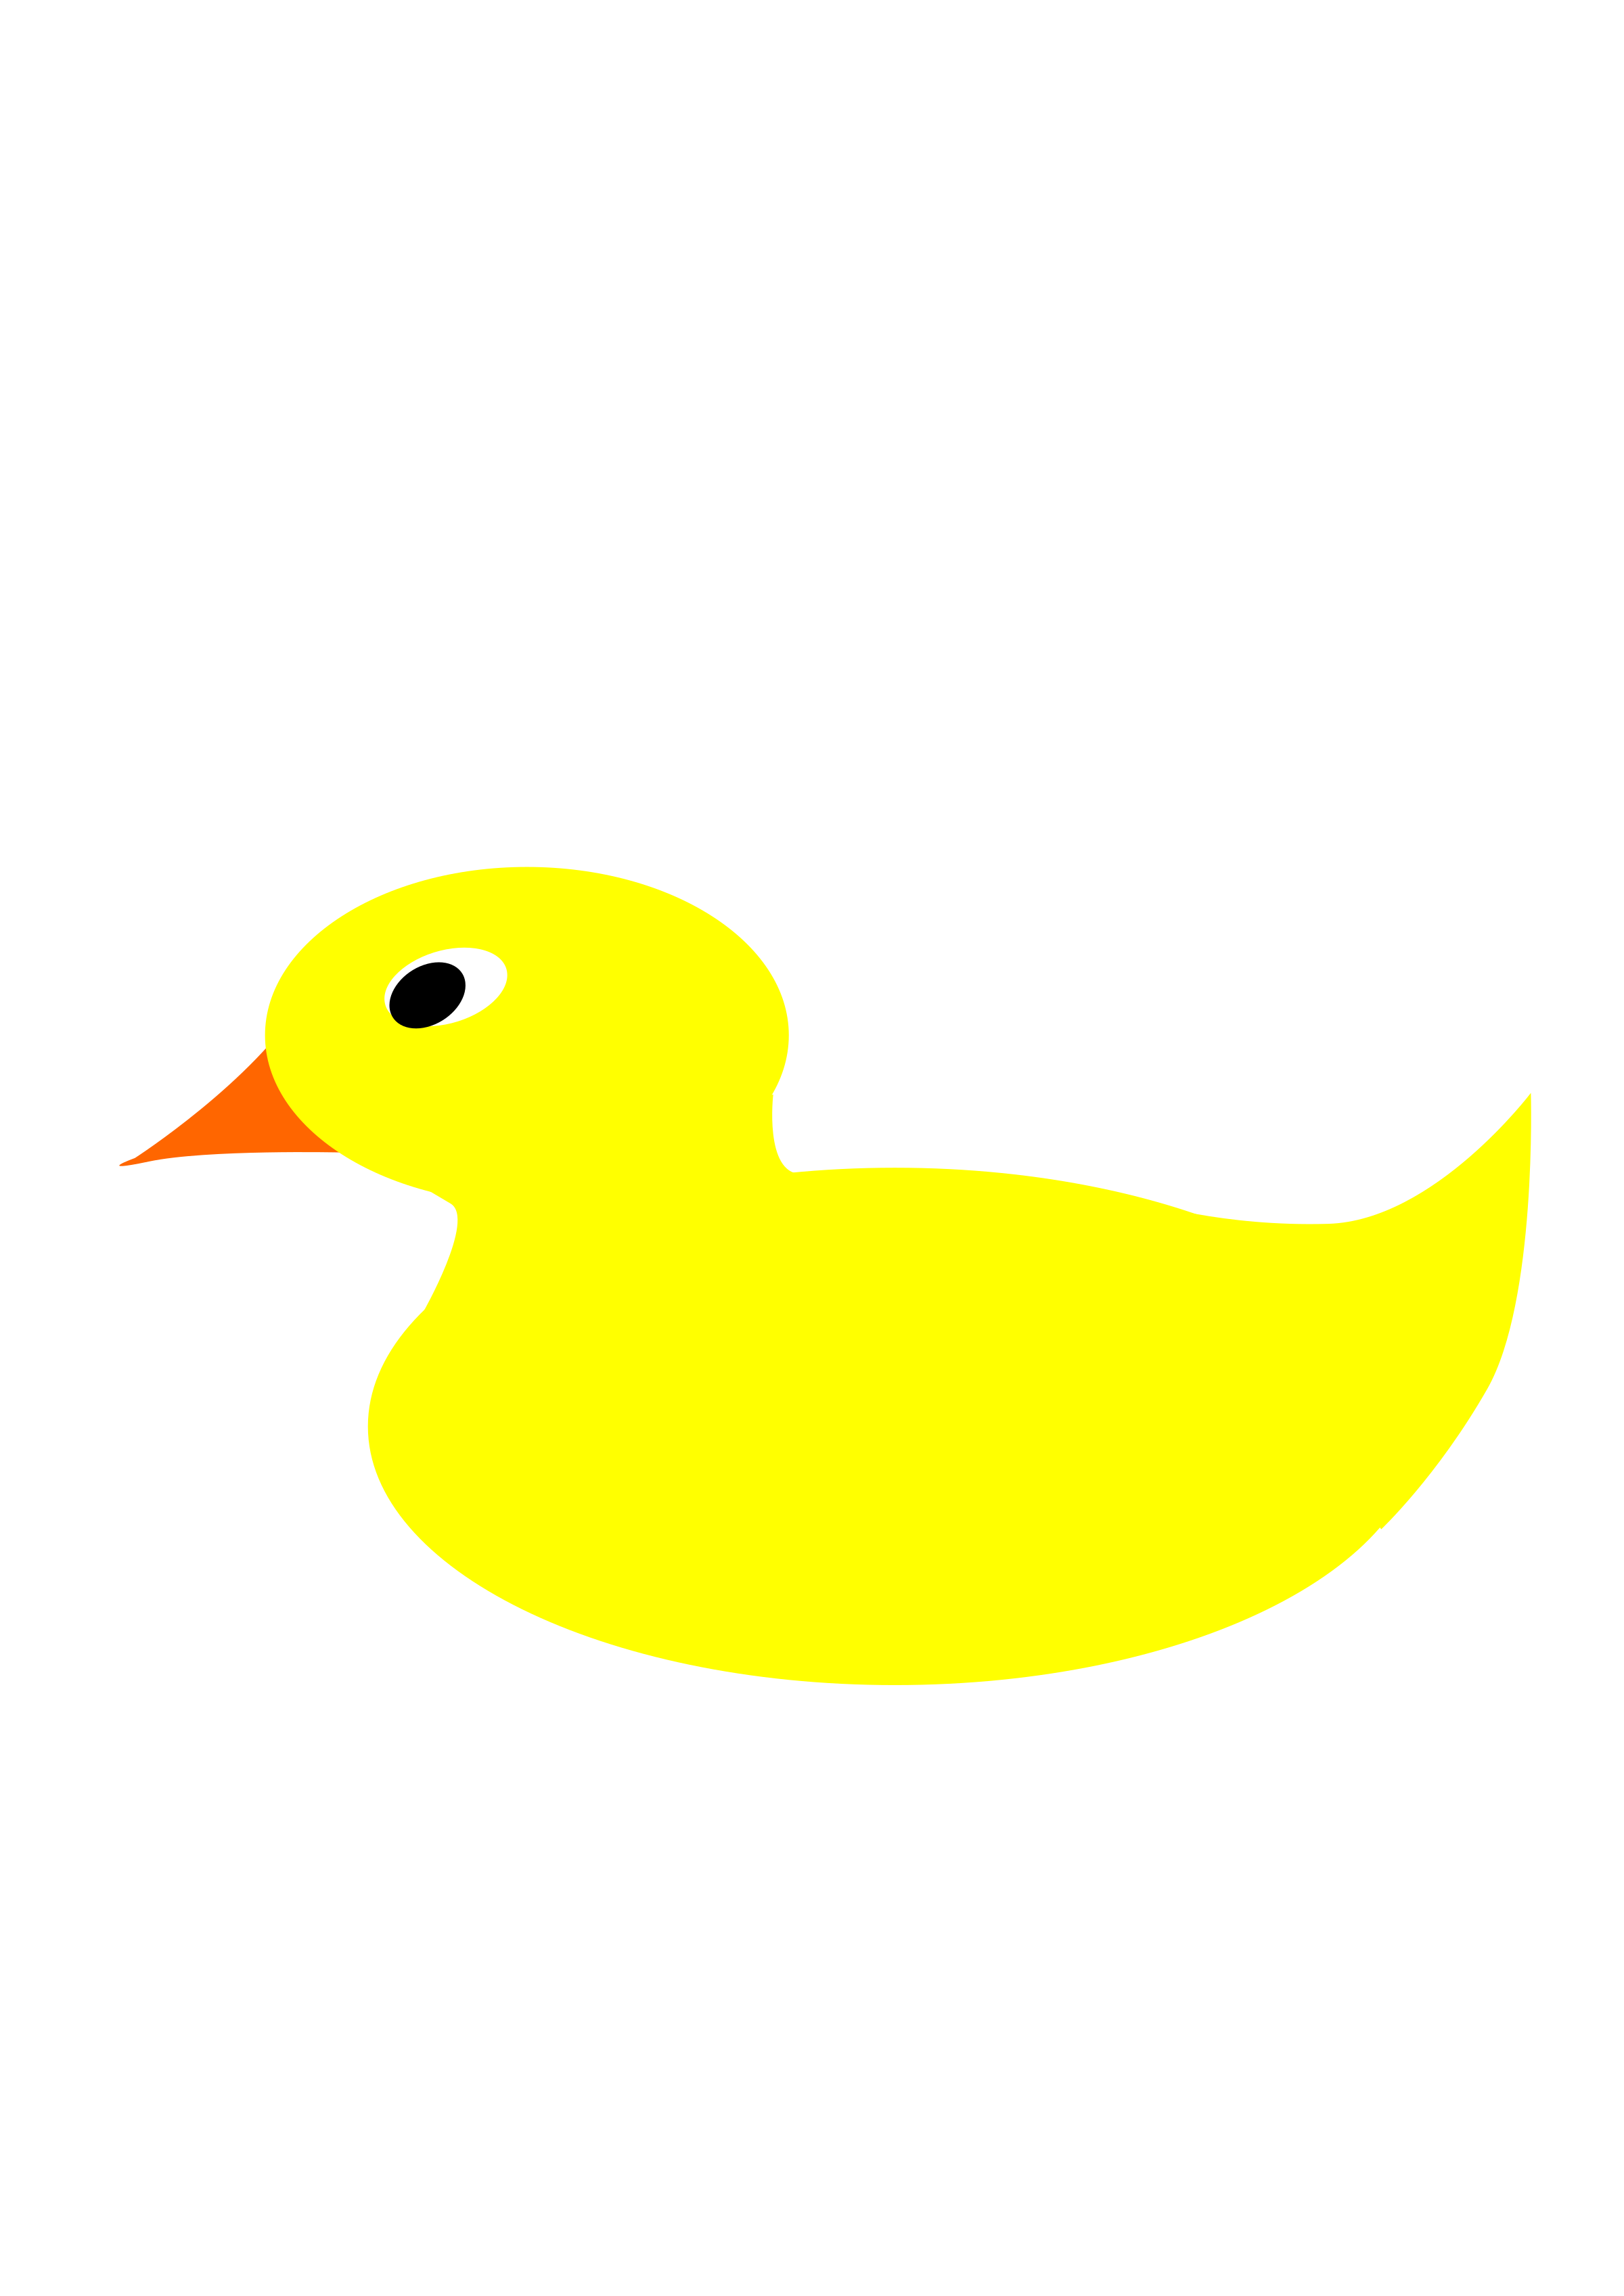 Simple Rubber Ducky By Barnheartowl